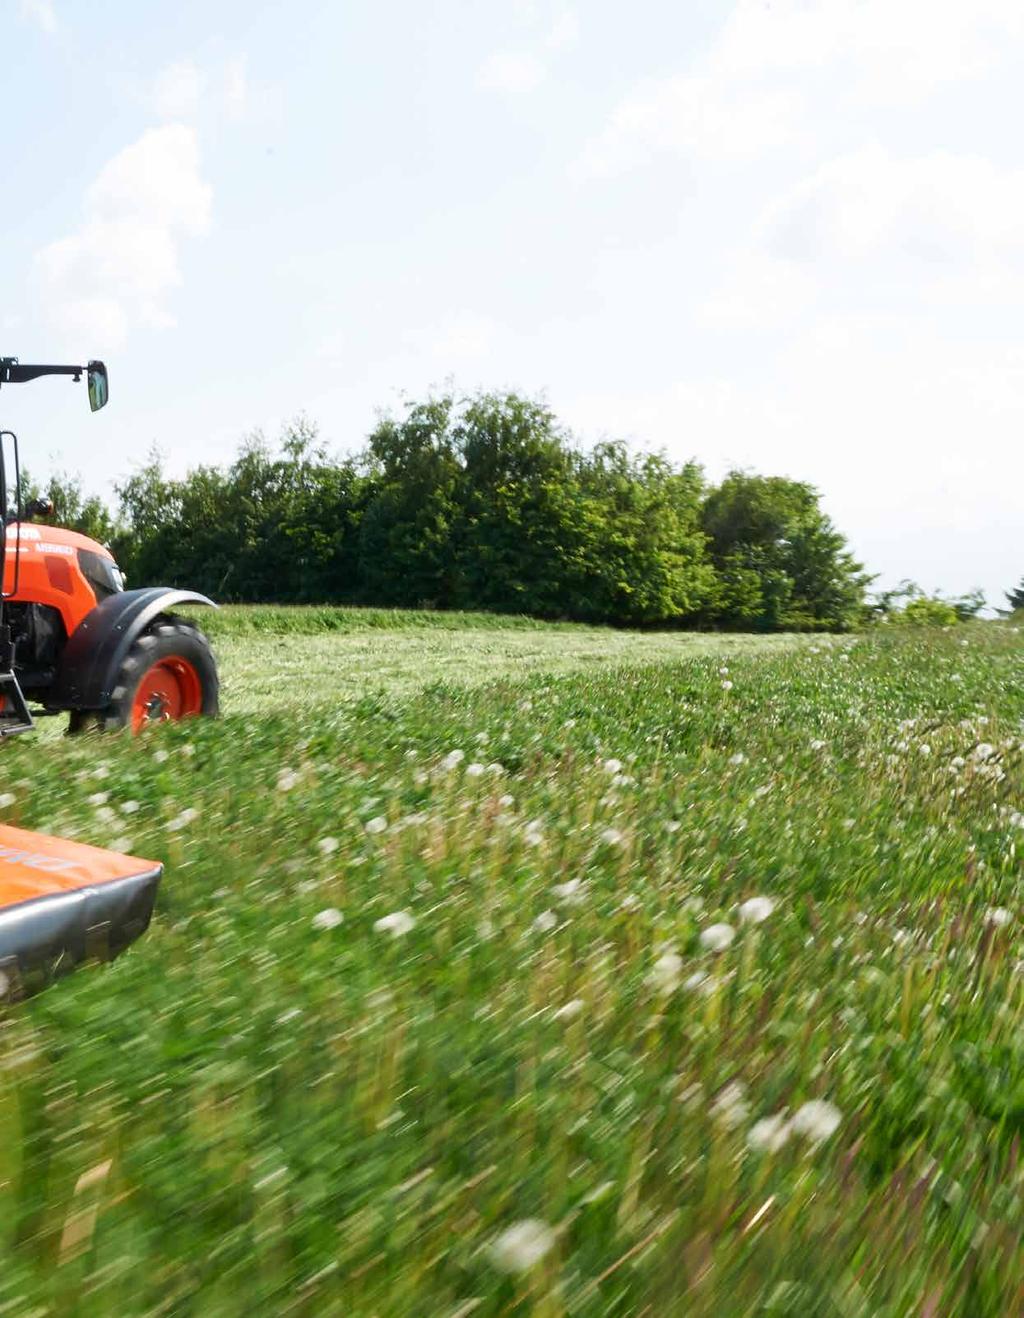 WHAT IS IMPORTANT All Kubota disc mowers are built for performance in even the toughest conditions.